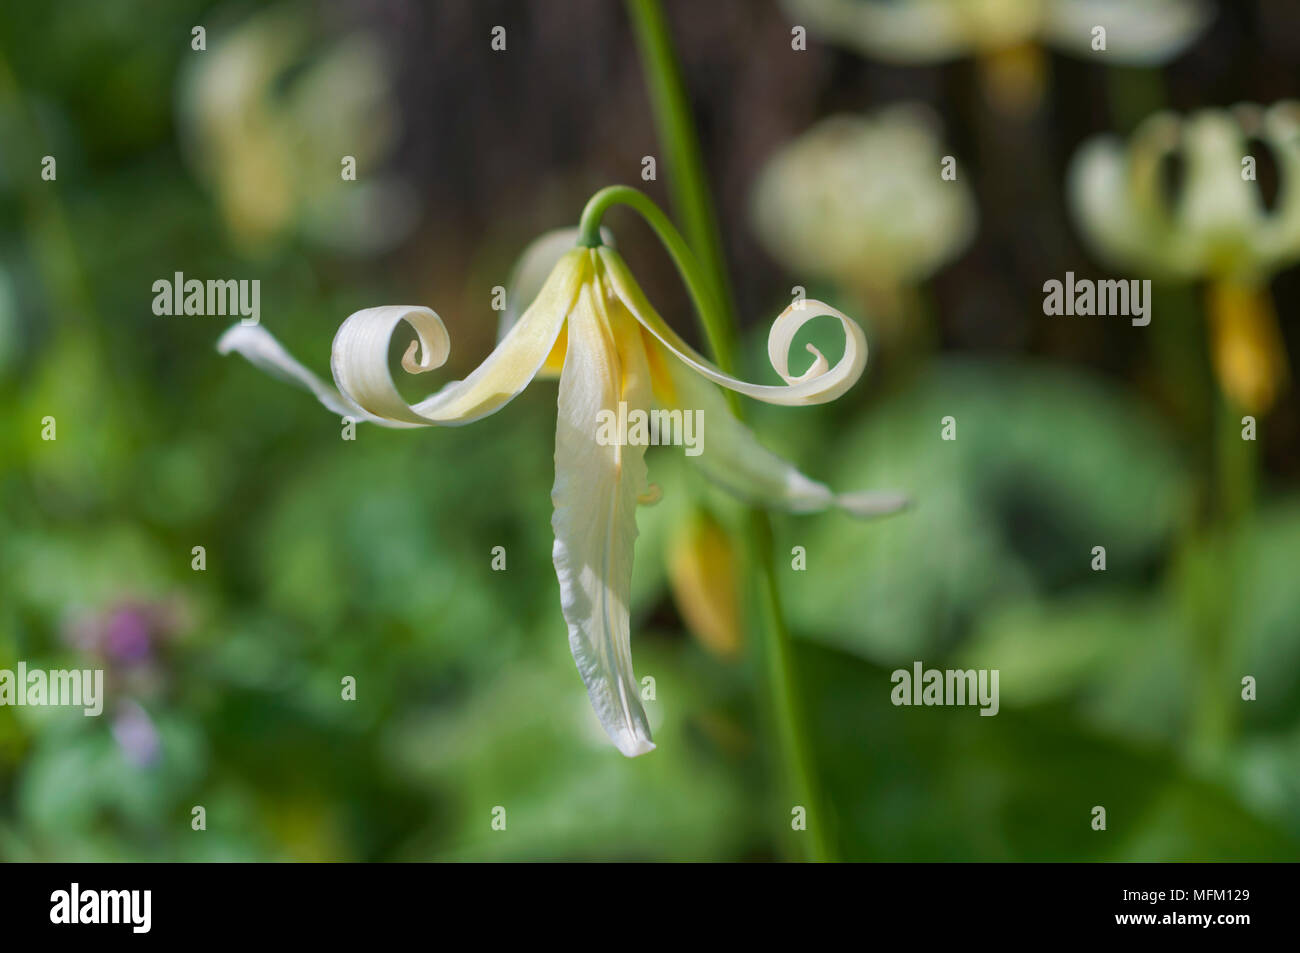 Closeup of single white fawn lily flower with whimsical curled petals in vertical position Stock Photo